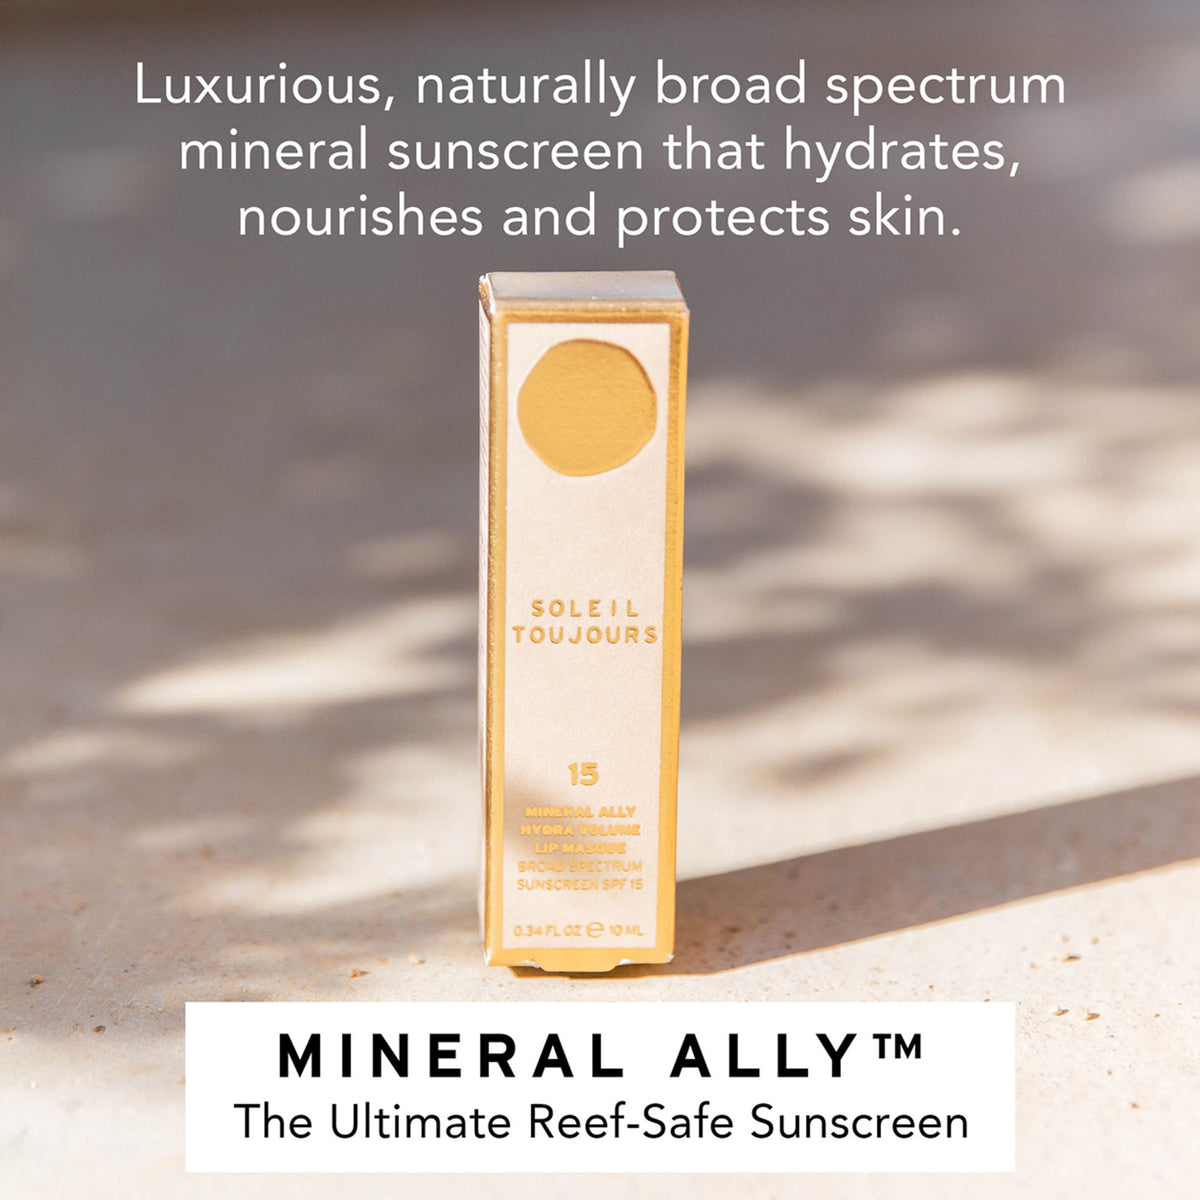 Soleil Toujours Mineral Ally Hydra Lip Masque SPF 15 .